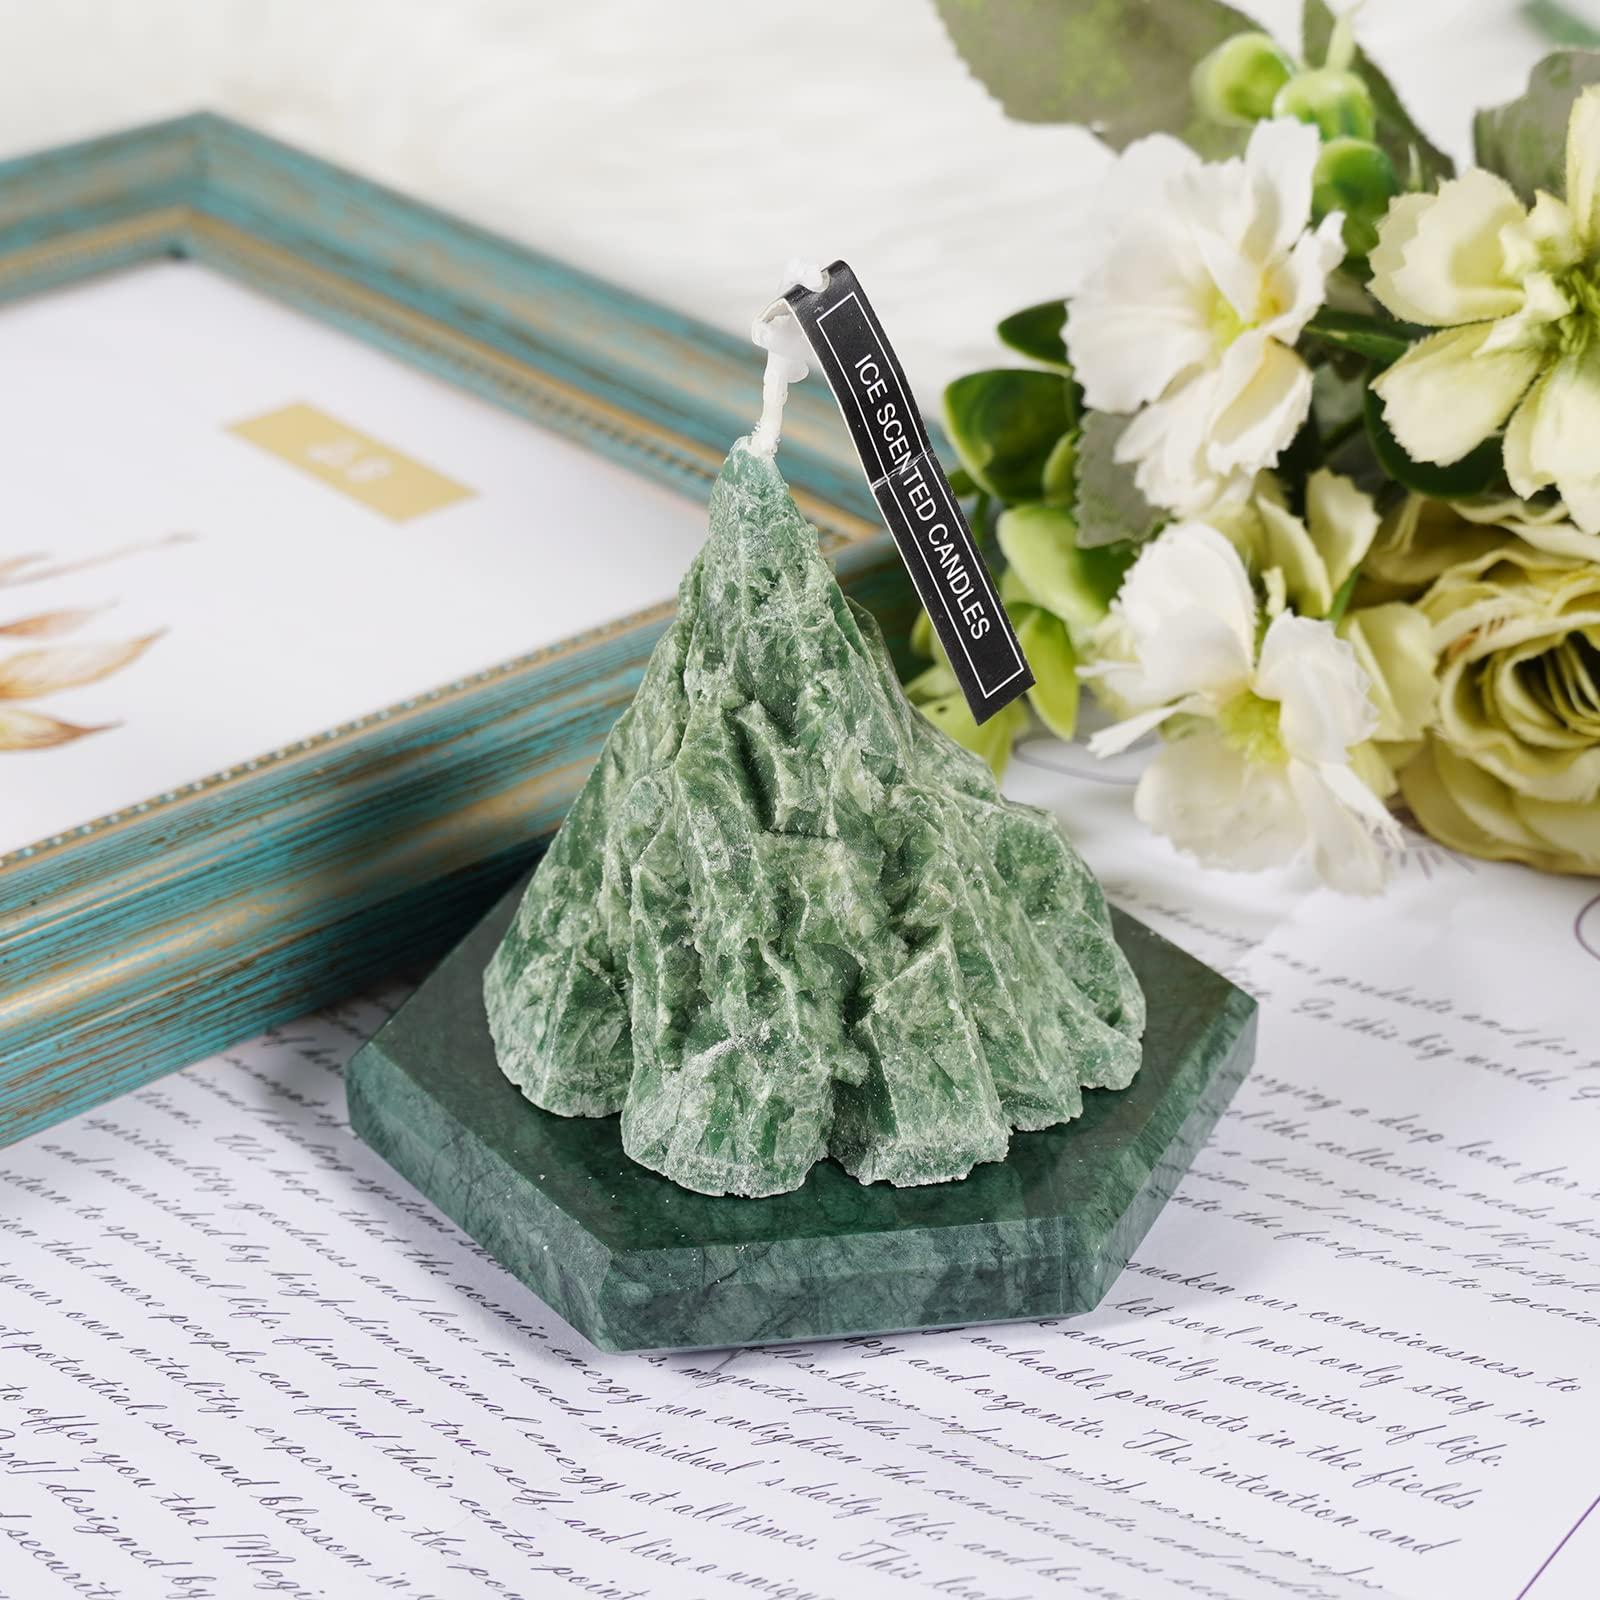 Soulnioi Aromatherapy Gift Scented Candles Marble Green Iceberg Fragrant Candle with Coaster Aroma Wax Flakes Fragrant Hanging Tablets Green Christmas Tree for Wedding Birthday Decor Women Gift 4